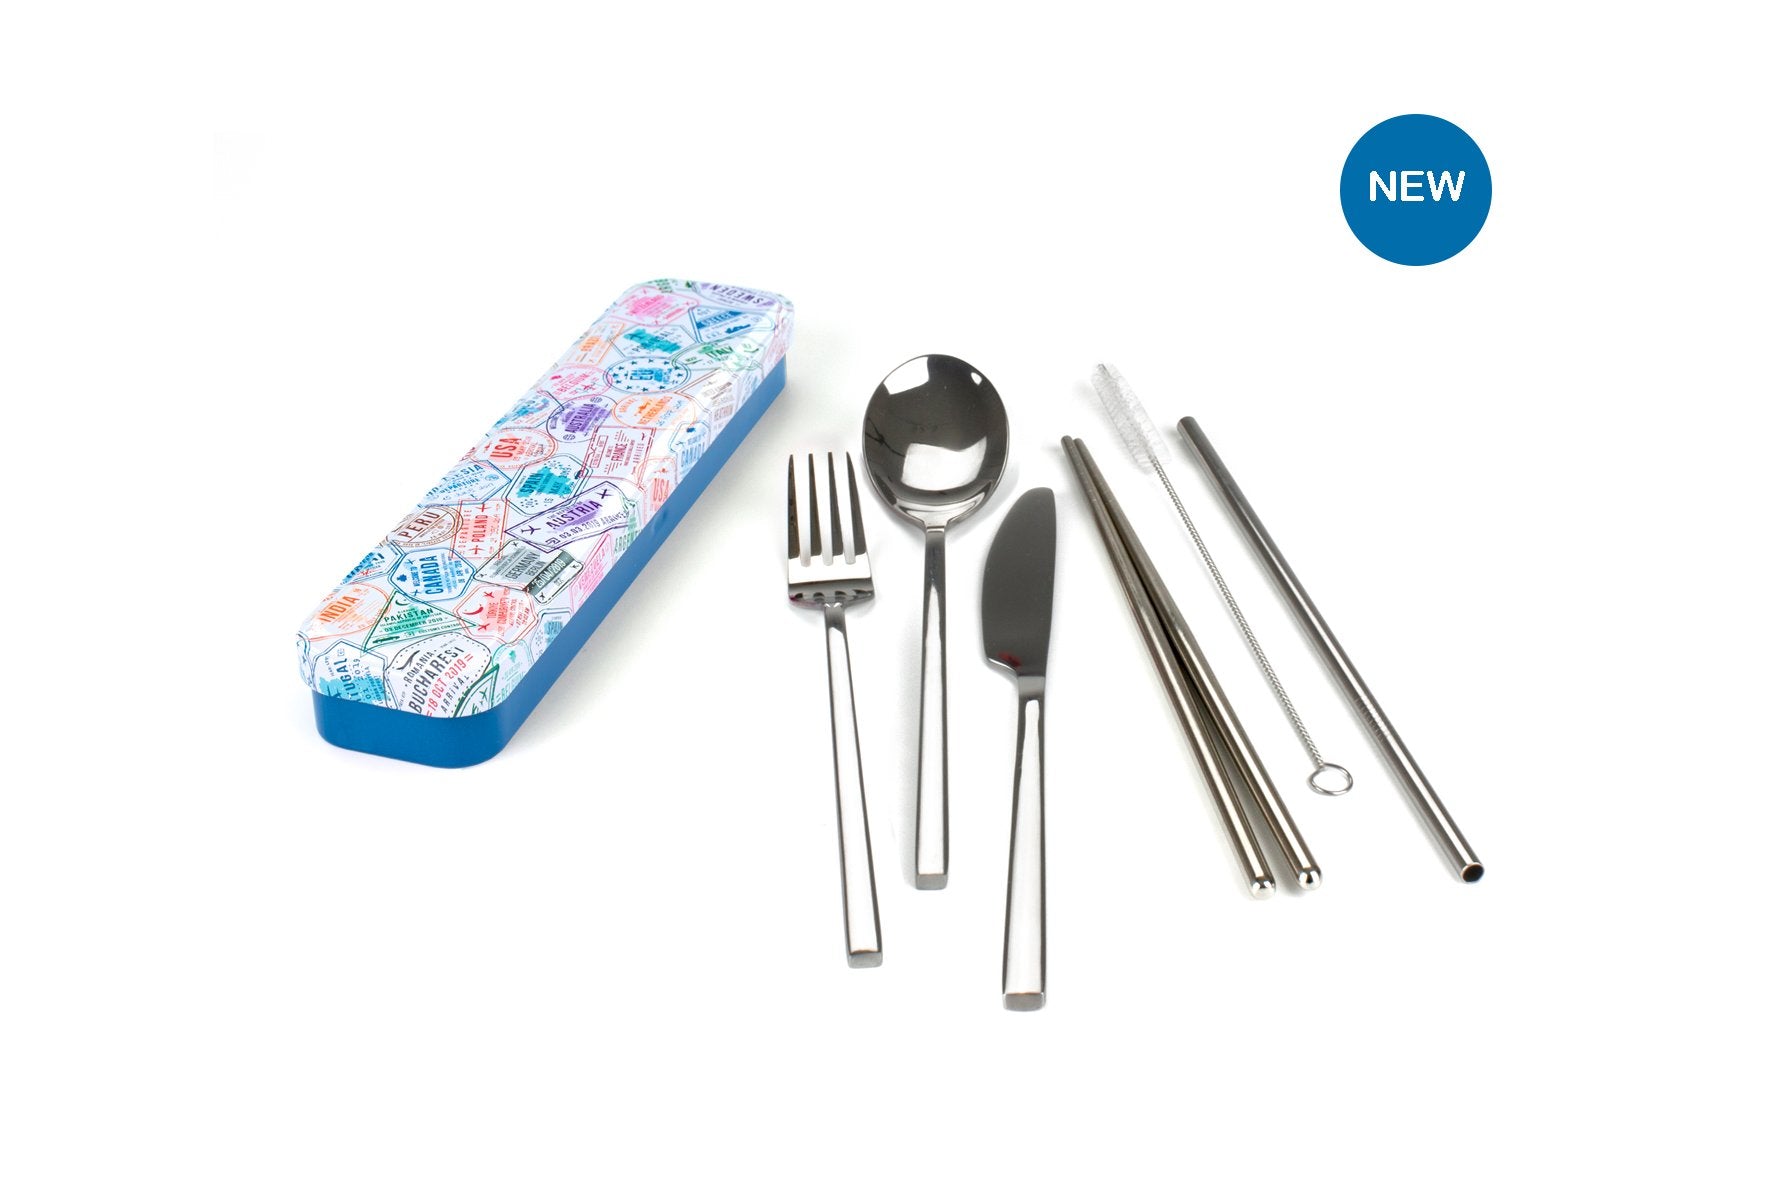 retro kitchen carry your cutlery - stainless steel cutlery set passport stamps